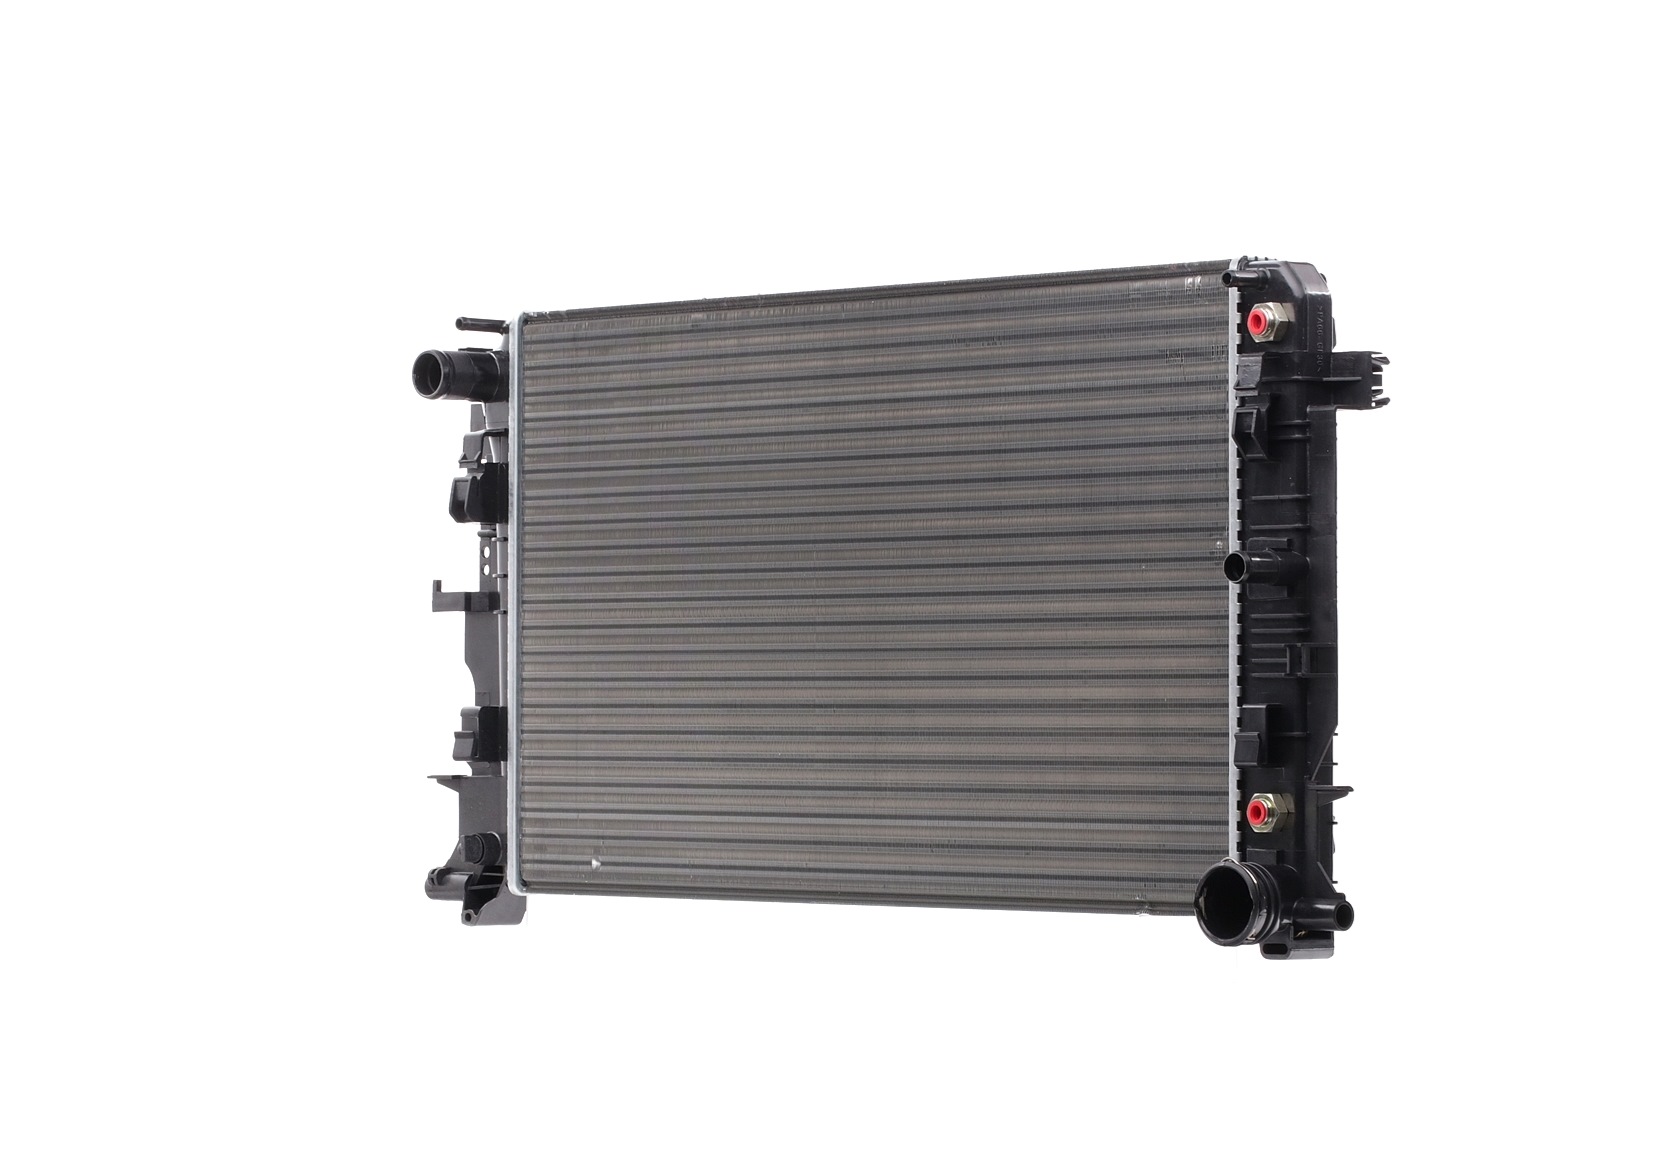 STARK Aluminium, Mechanically jointed cooling fins Core Dimensions: 680 x 408 x 28 mm Radiator SKRD-0120803 buy